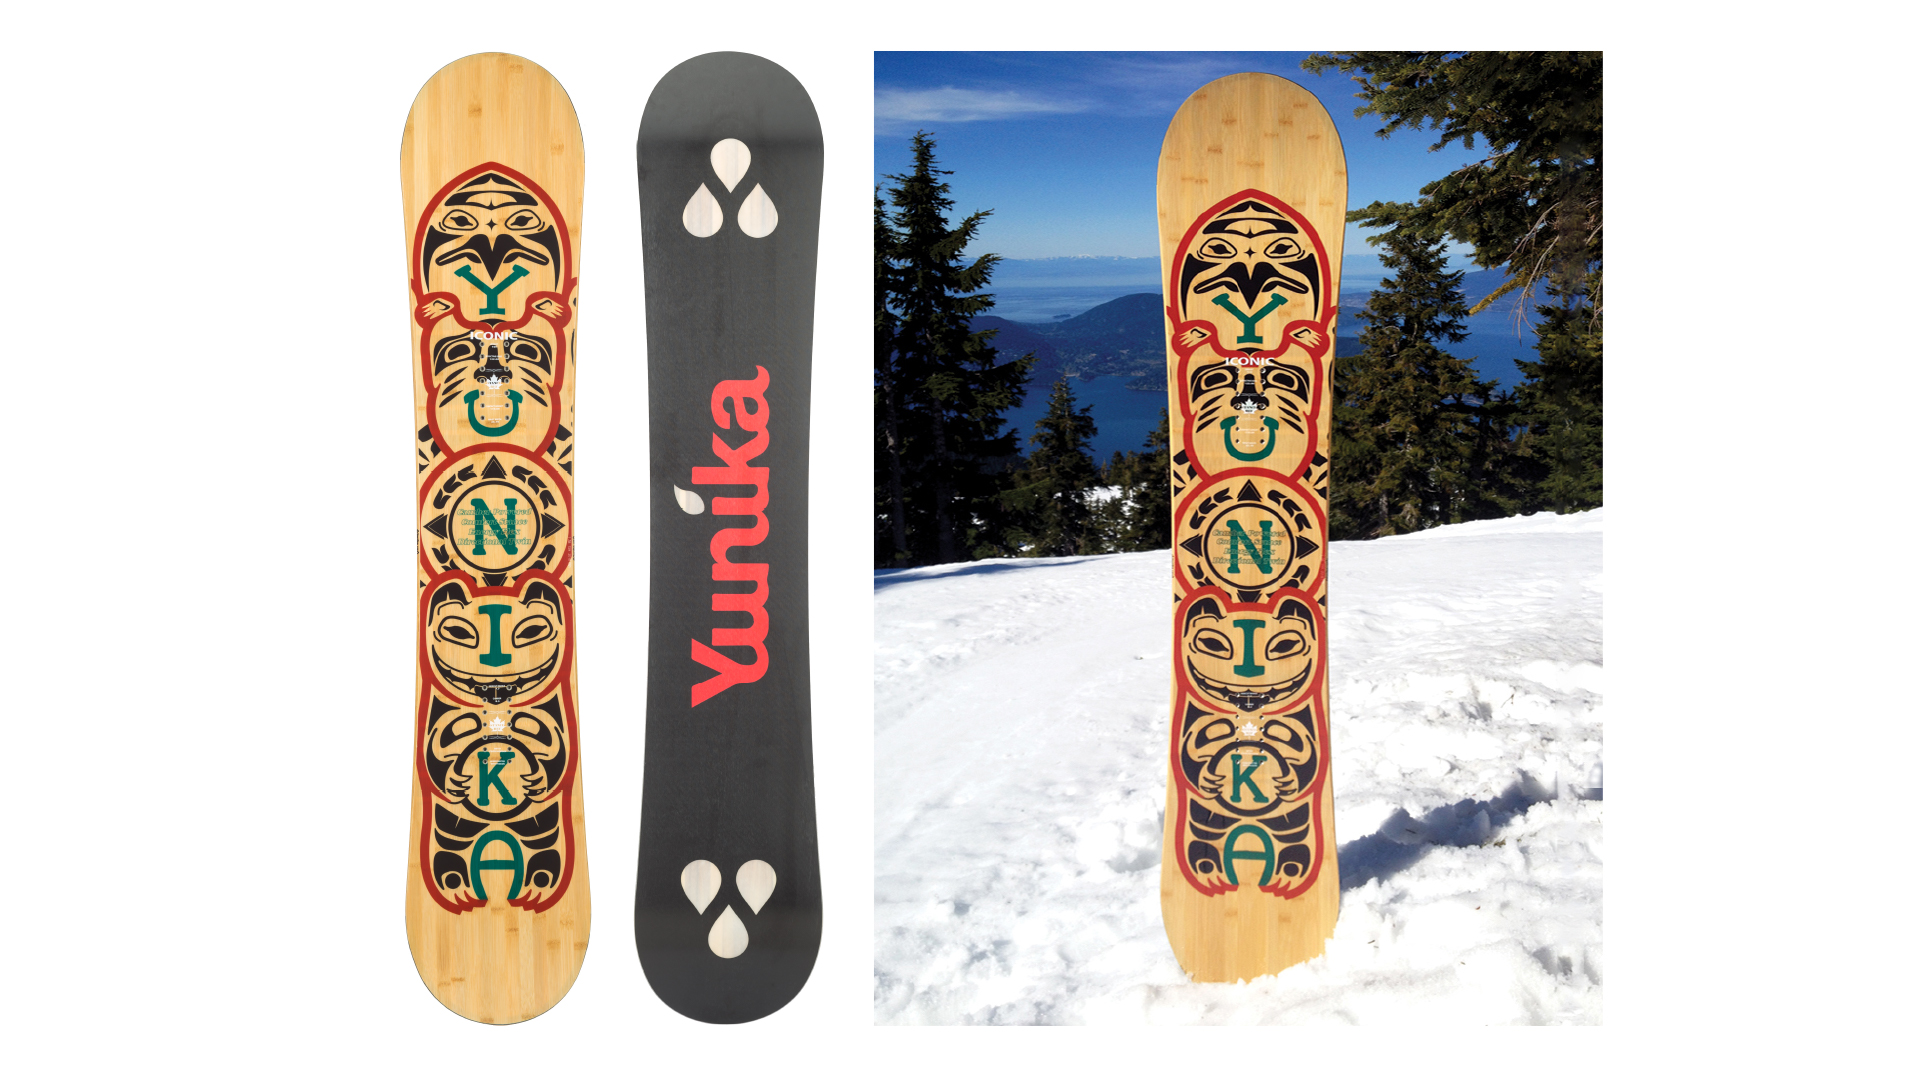 collage of Yunika Iconic product photos, features First Nation Totem design